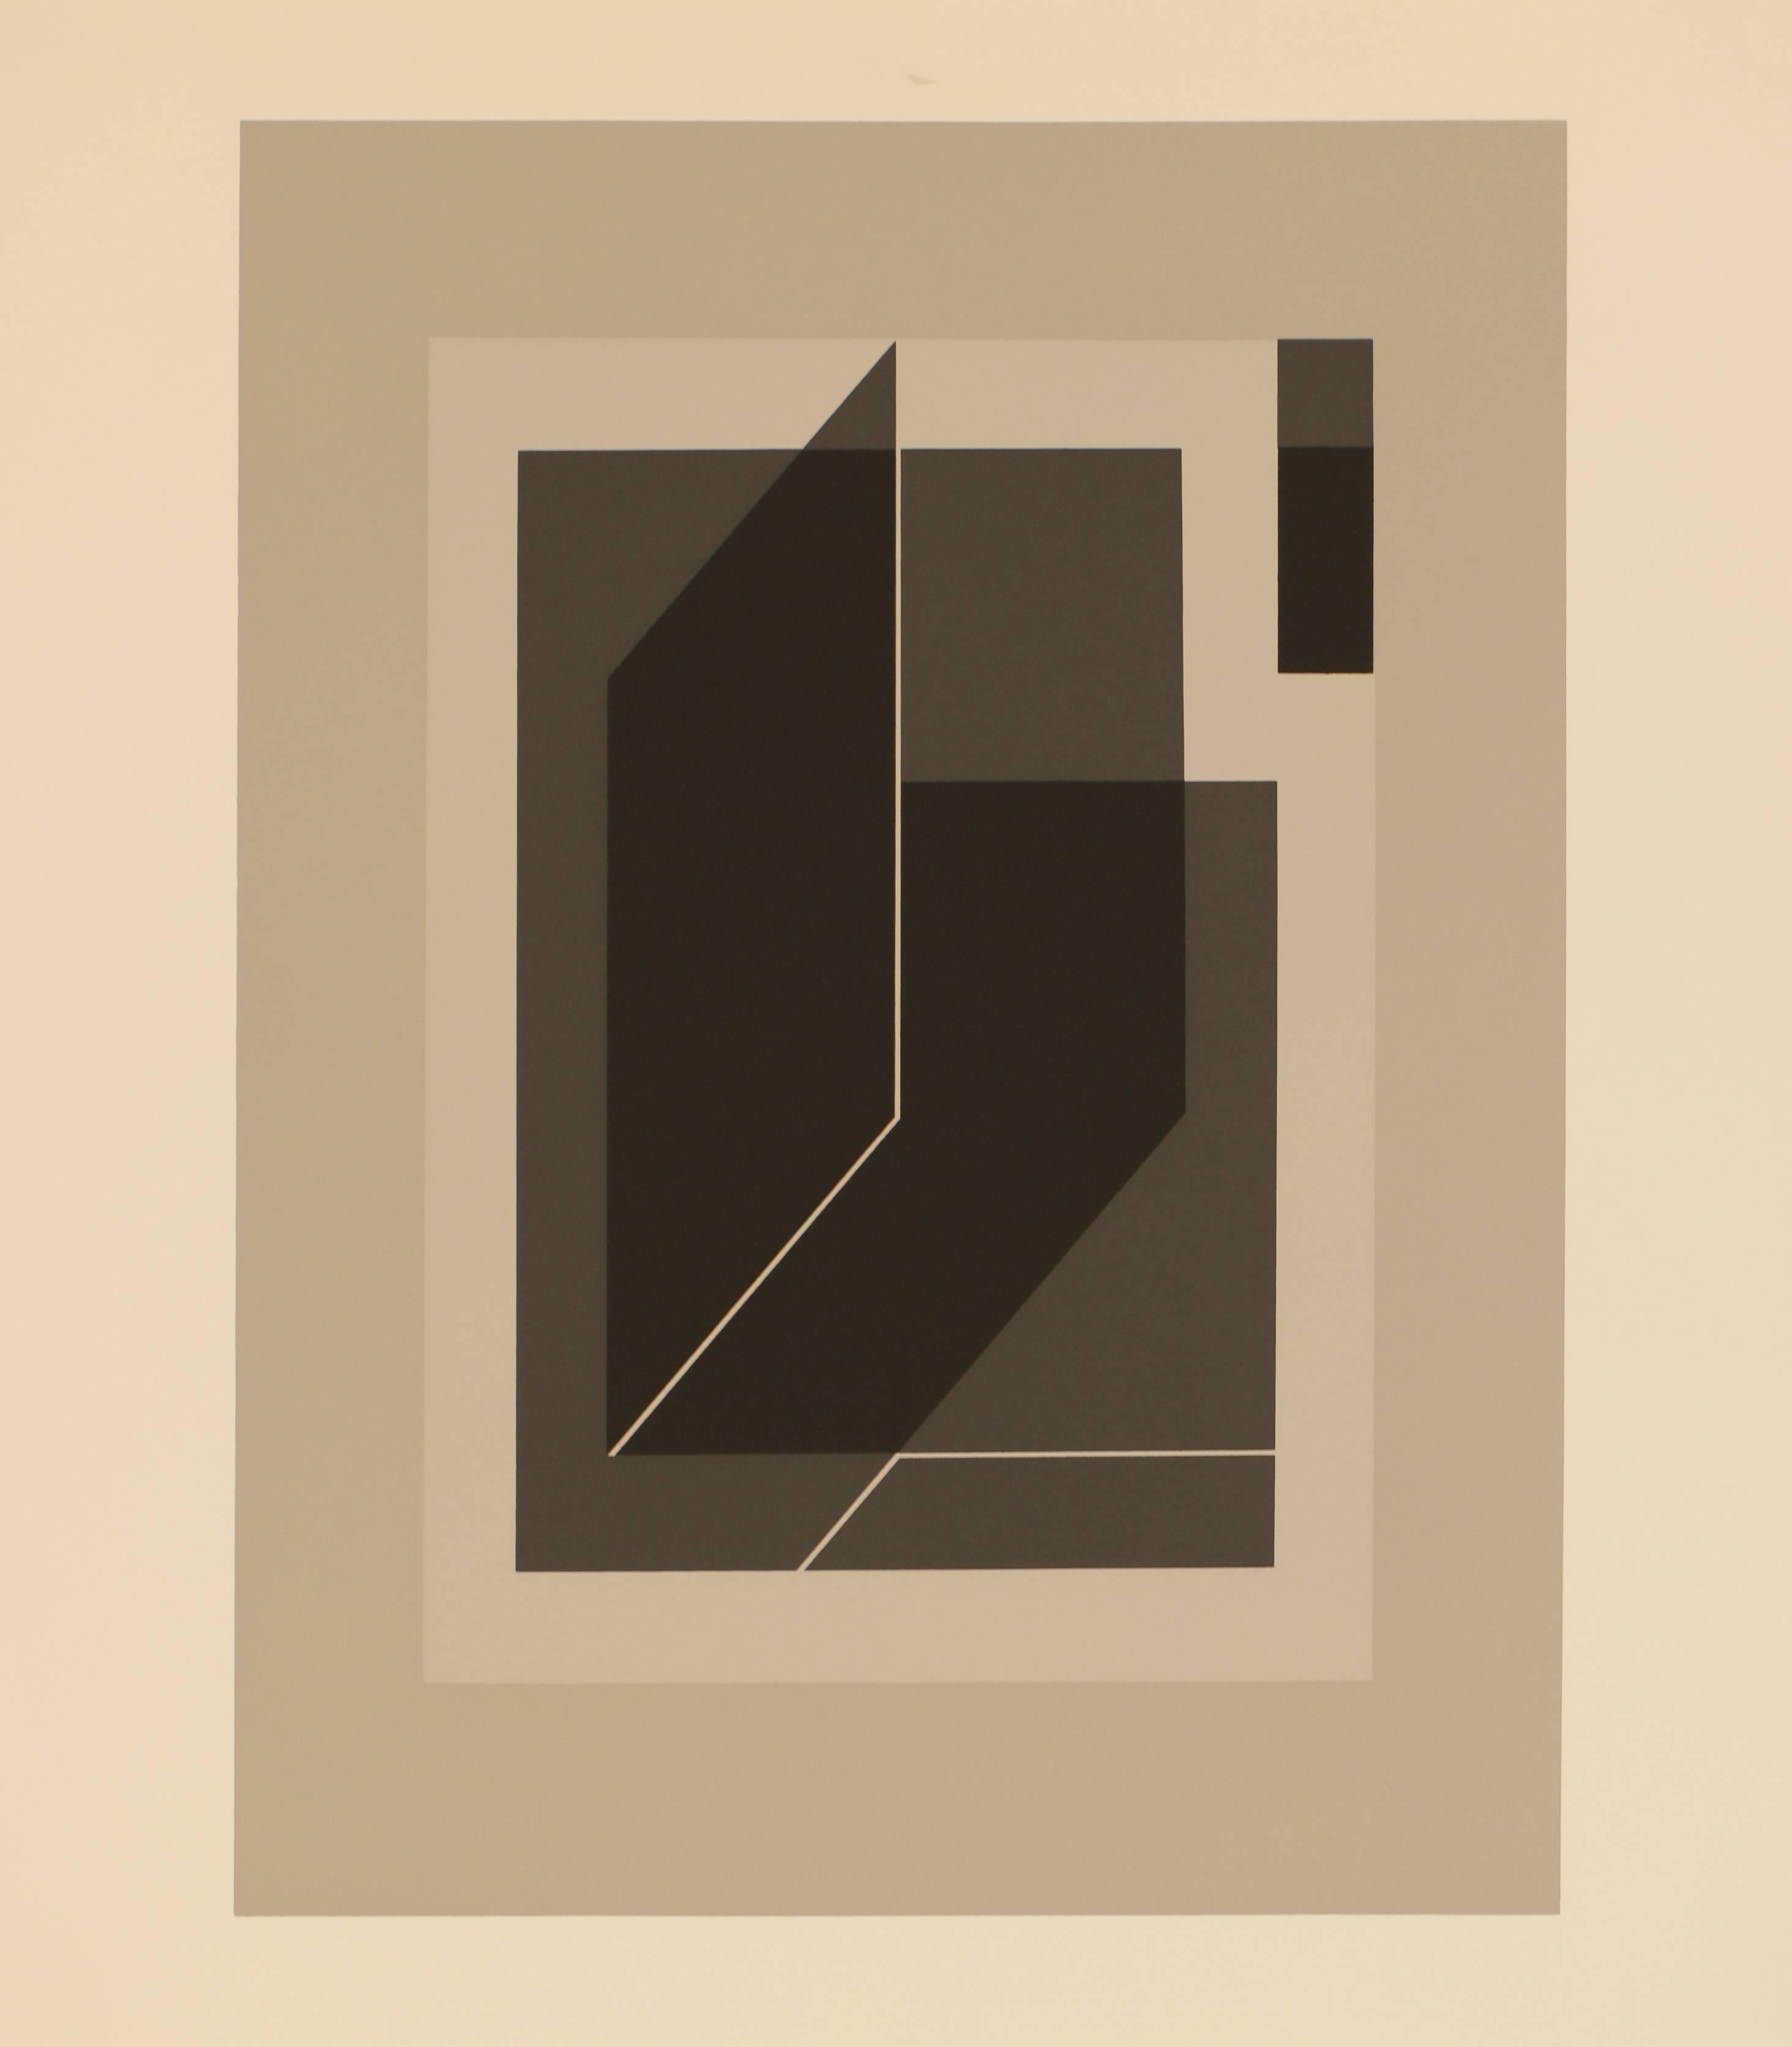 Silkscreen by Josef Albers from his classic work, Formulation:Articulation, published by Harry N. Abrams, 1972, and printed by Ives - Sillman. The individual images are unsigned. Albers' signature appears on the title page of Portfolio I. Image